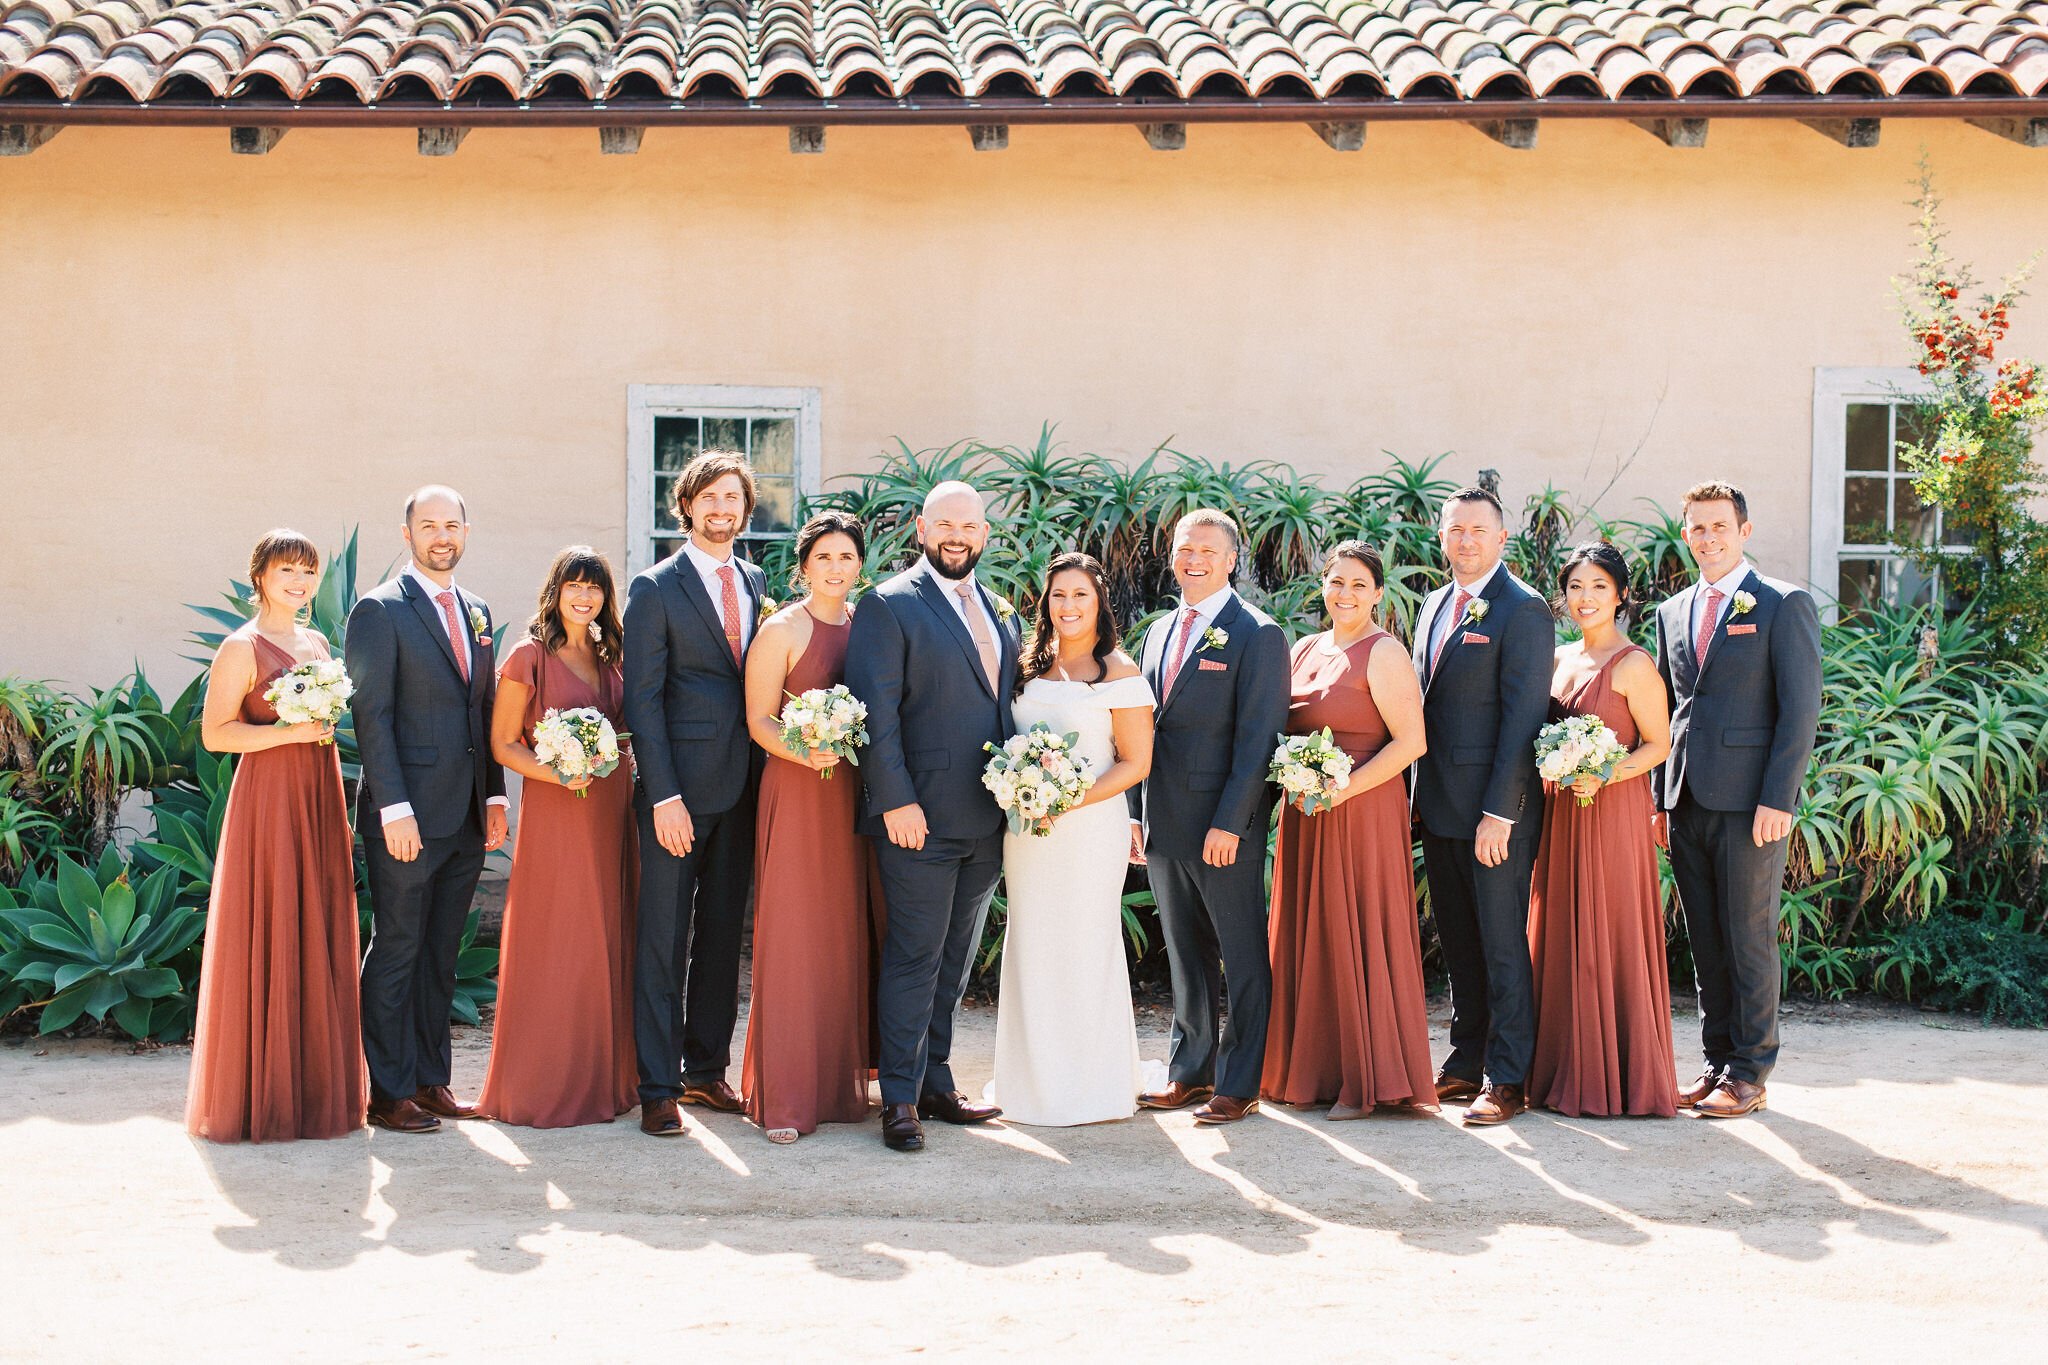 www.santabarbarawedding.com | Santa Barbara Historical Museum | Grace Kathryn Photography | Couple and Wedding Party with Burnt Orange Dresses Under the Tiled Roof 